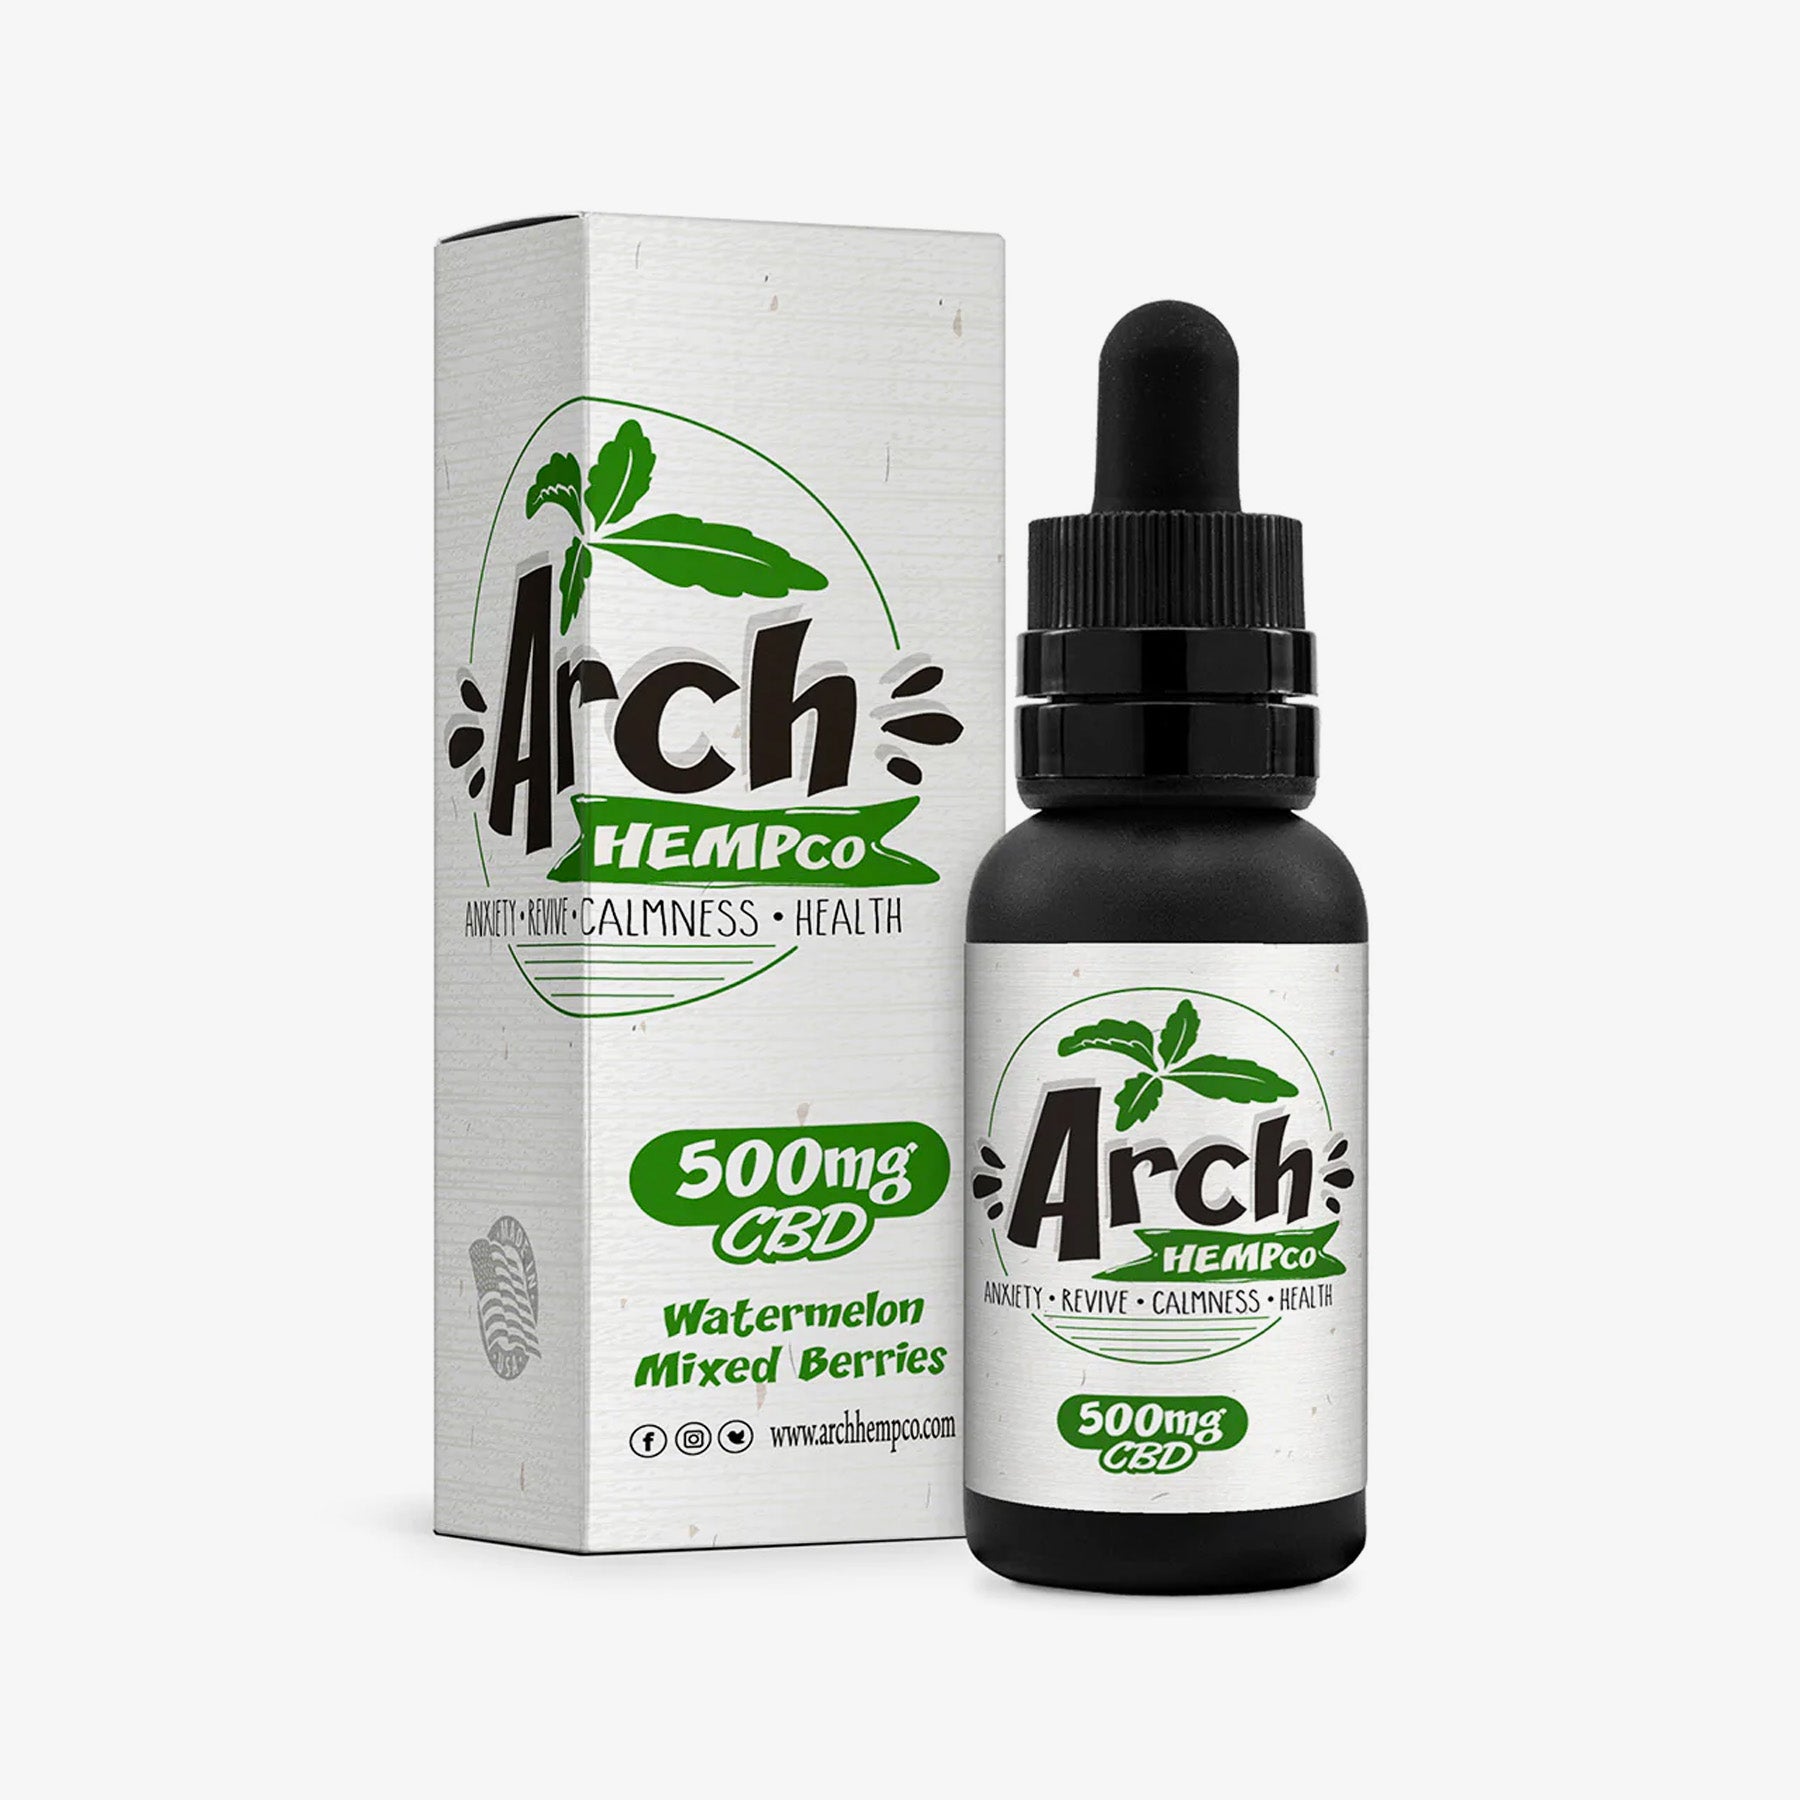 arch hempco isolate tincture watermelon mixed berries 500 milligrams